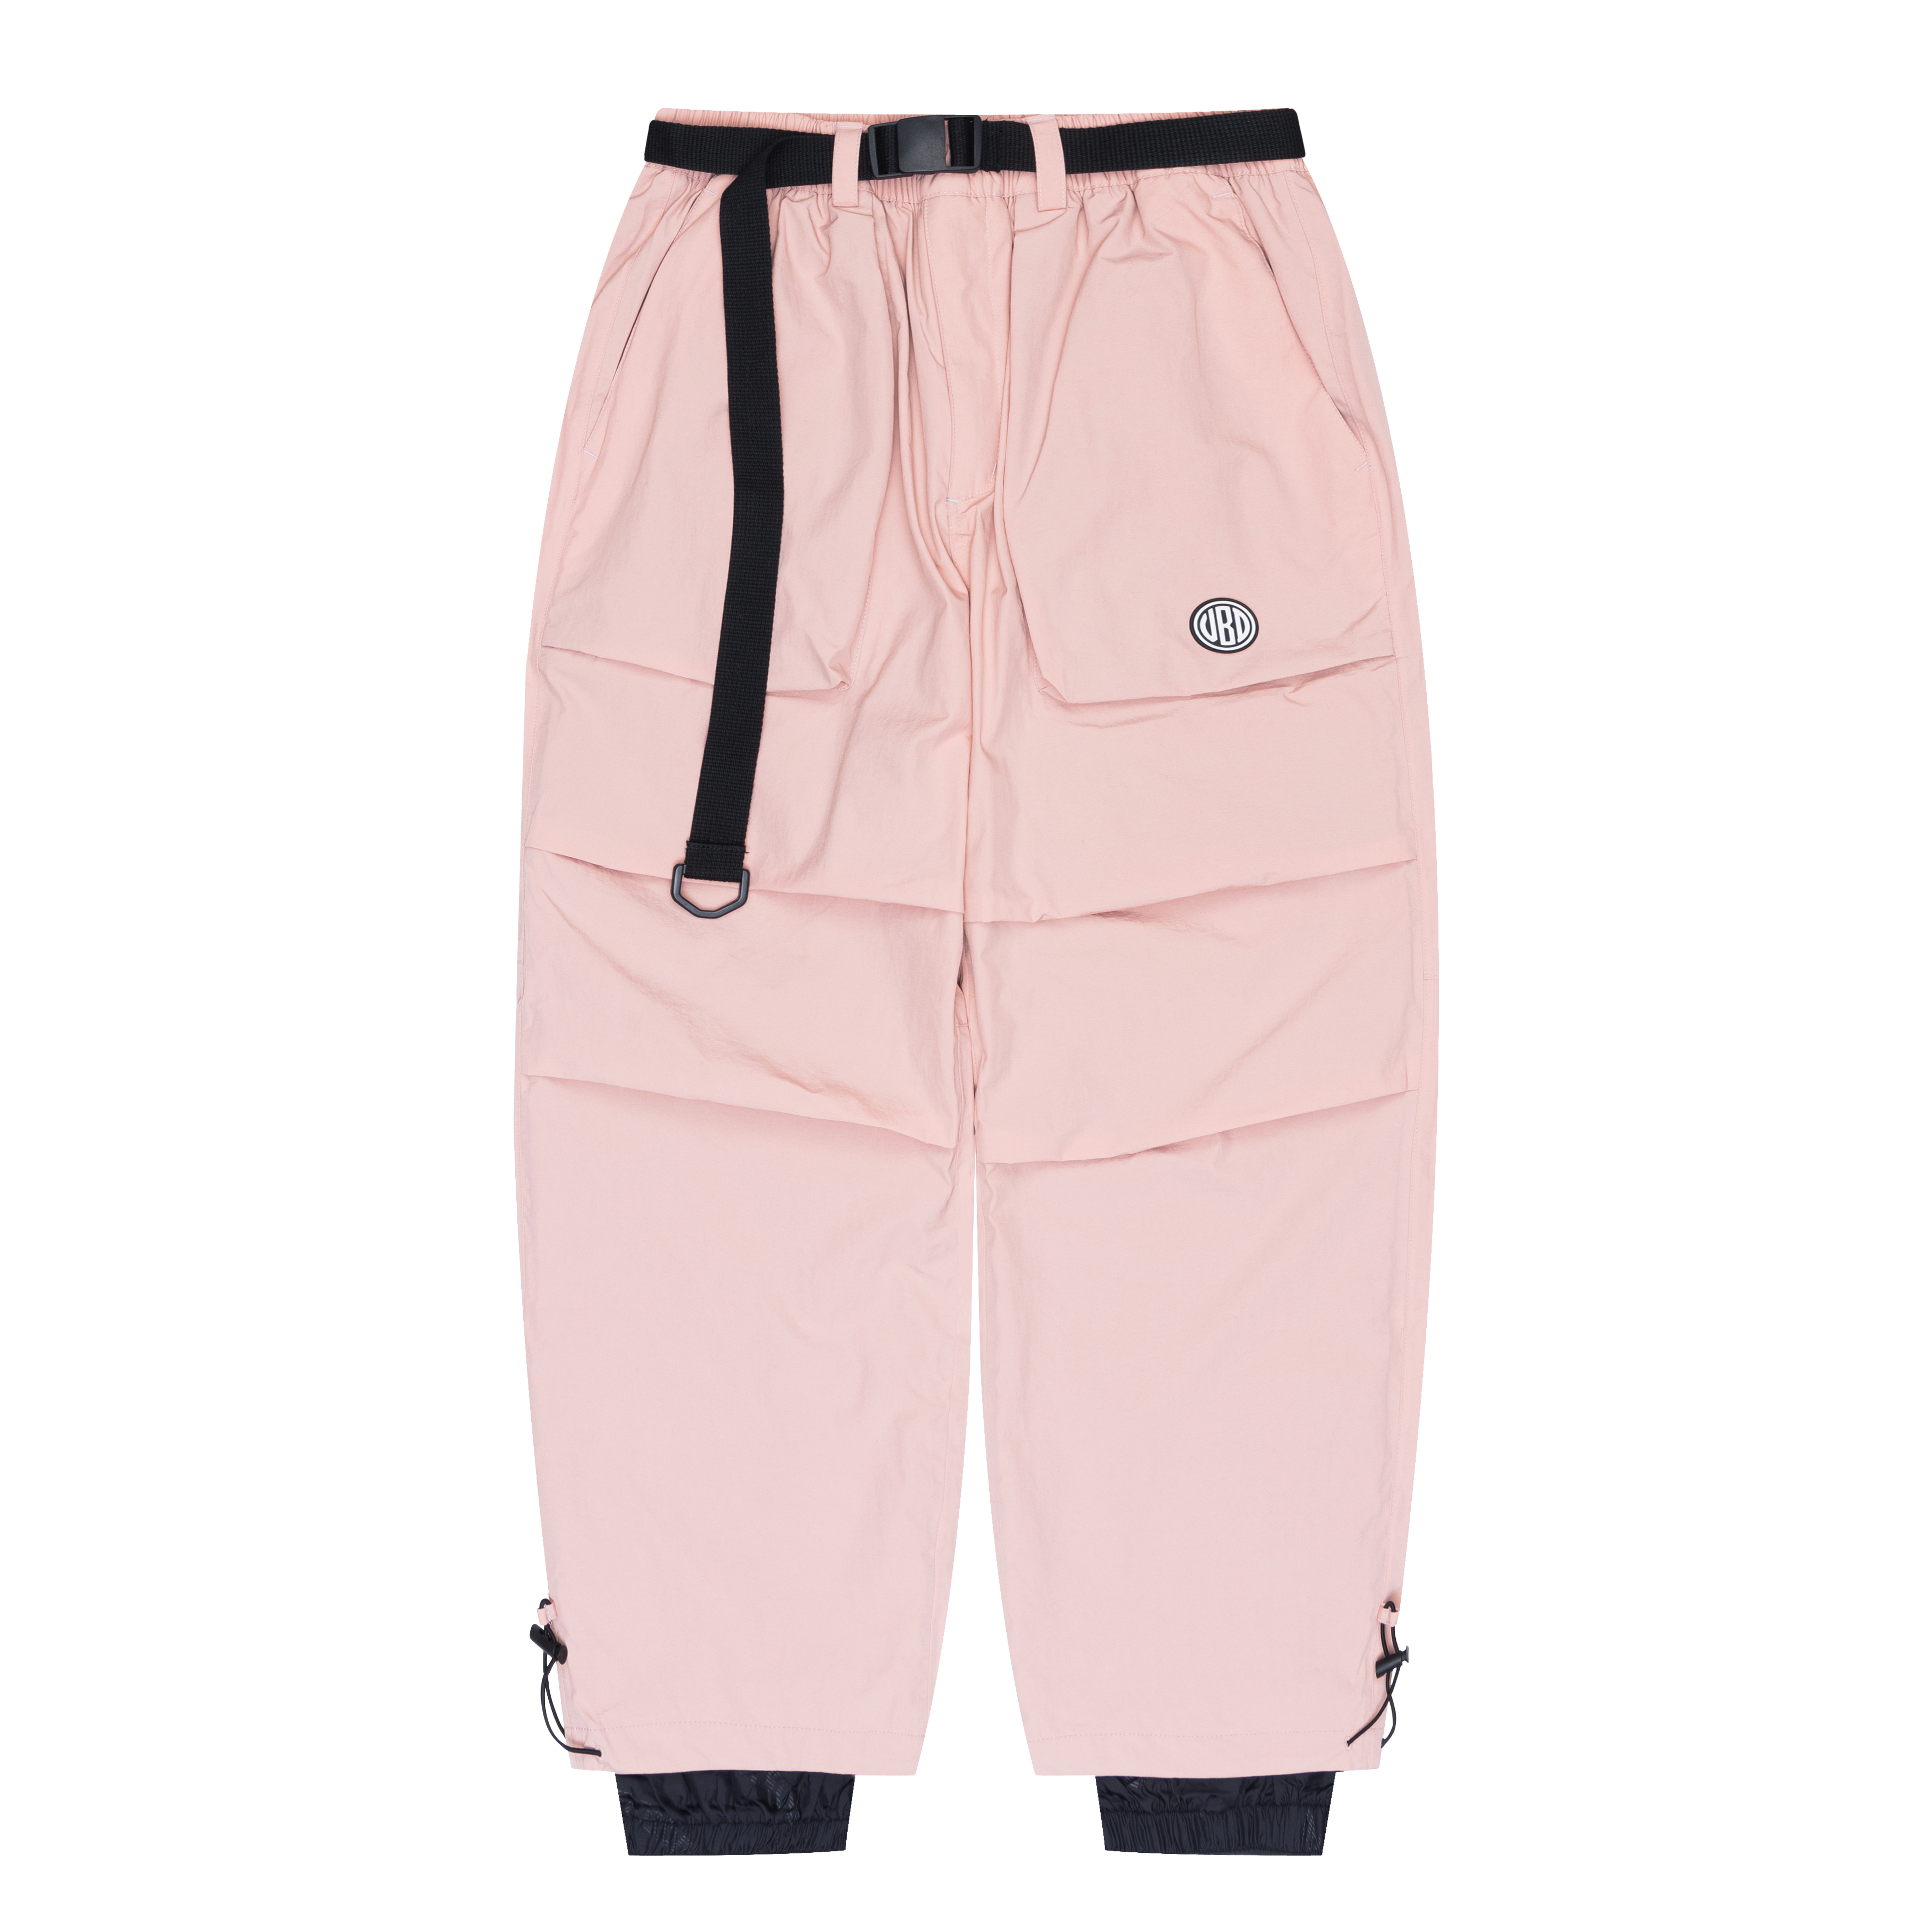 OVERSIZED PANTS - INDY PINK